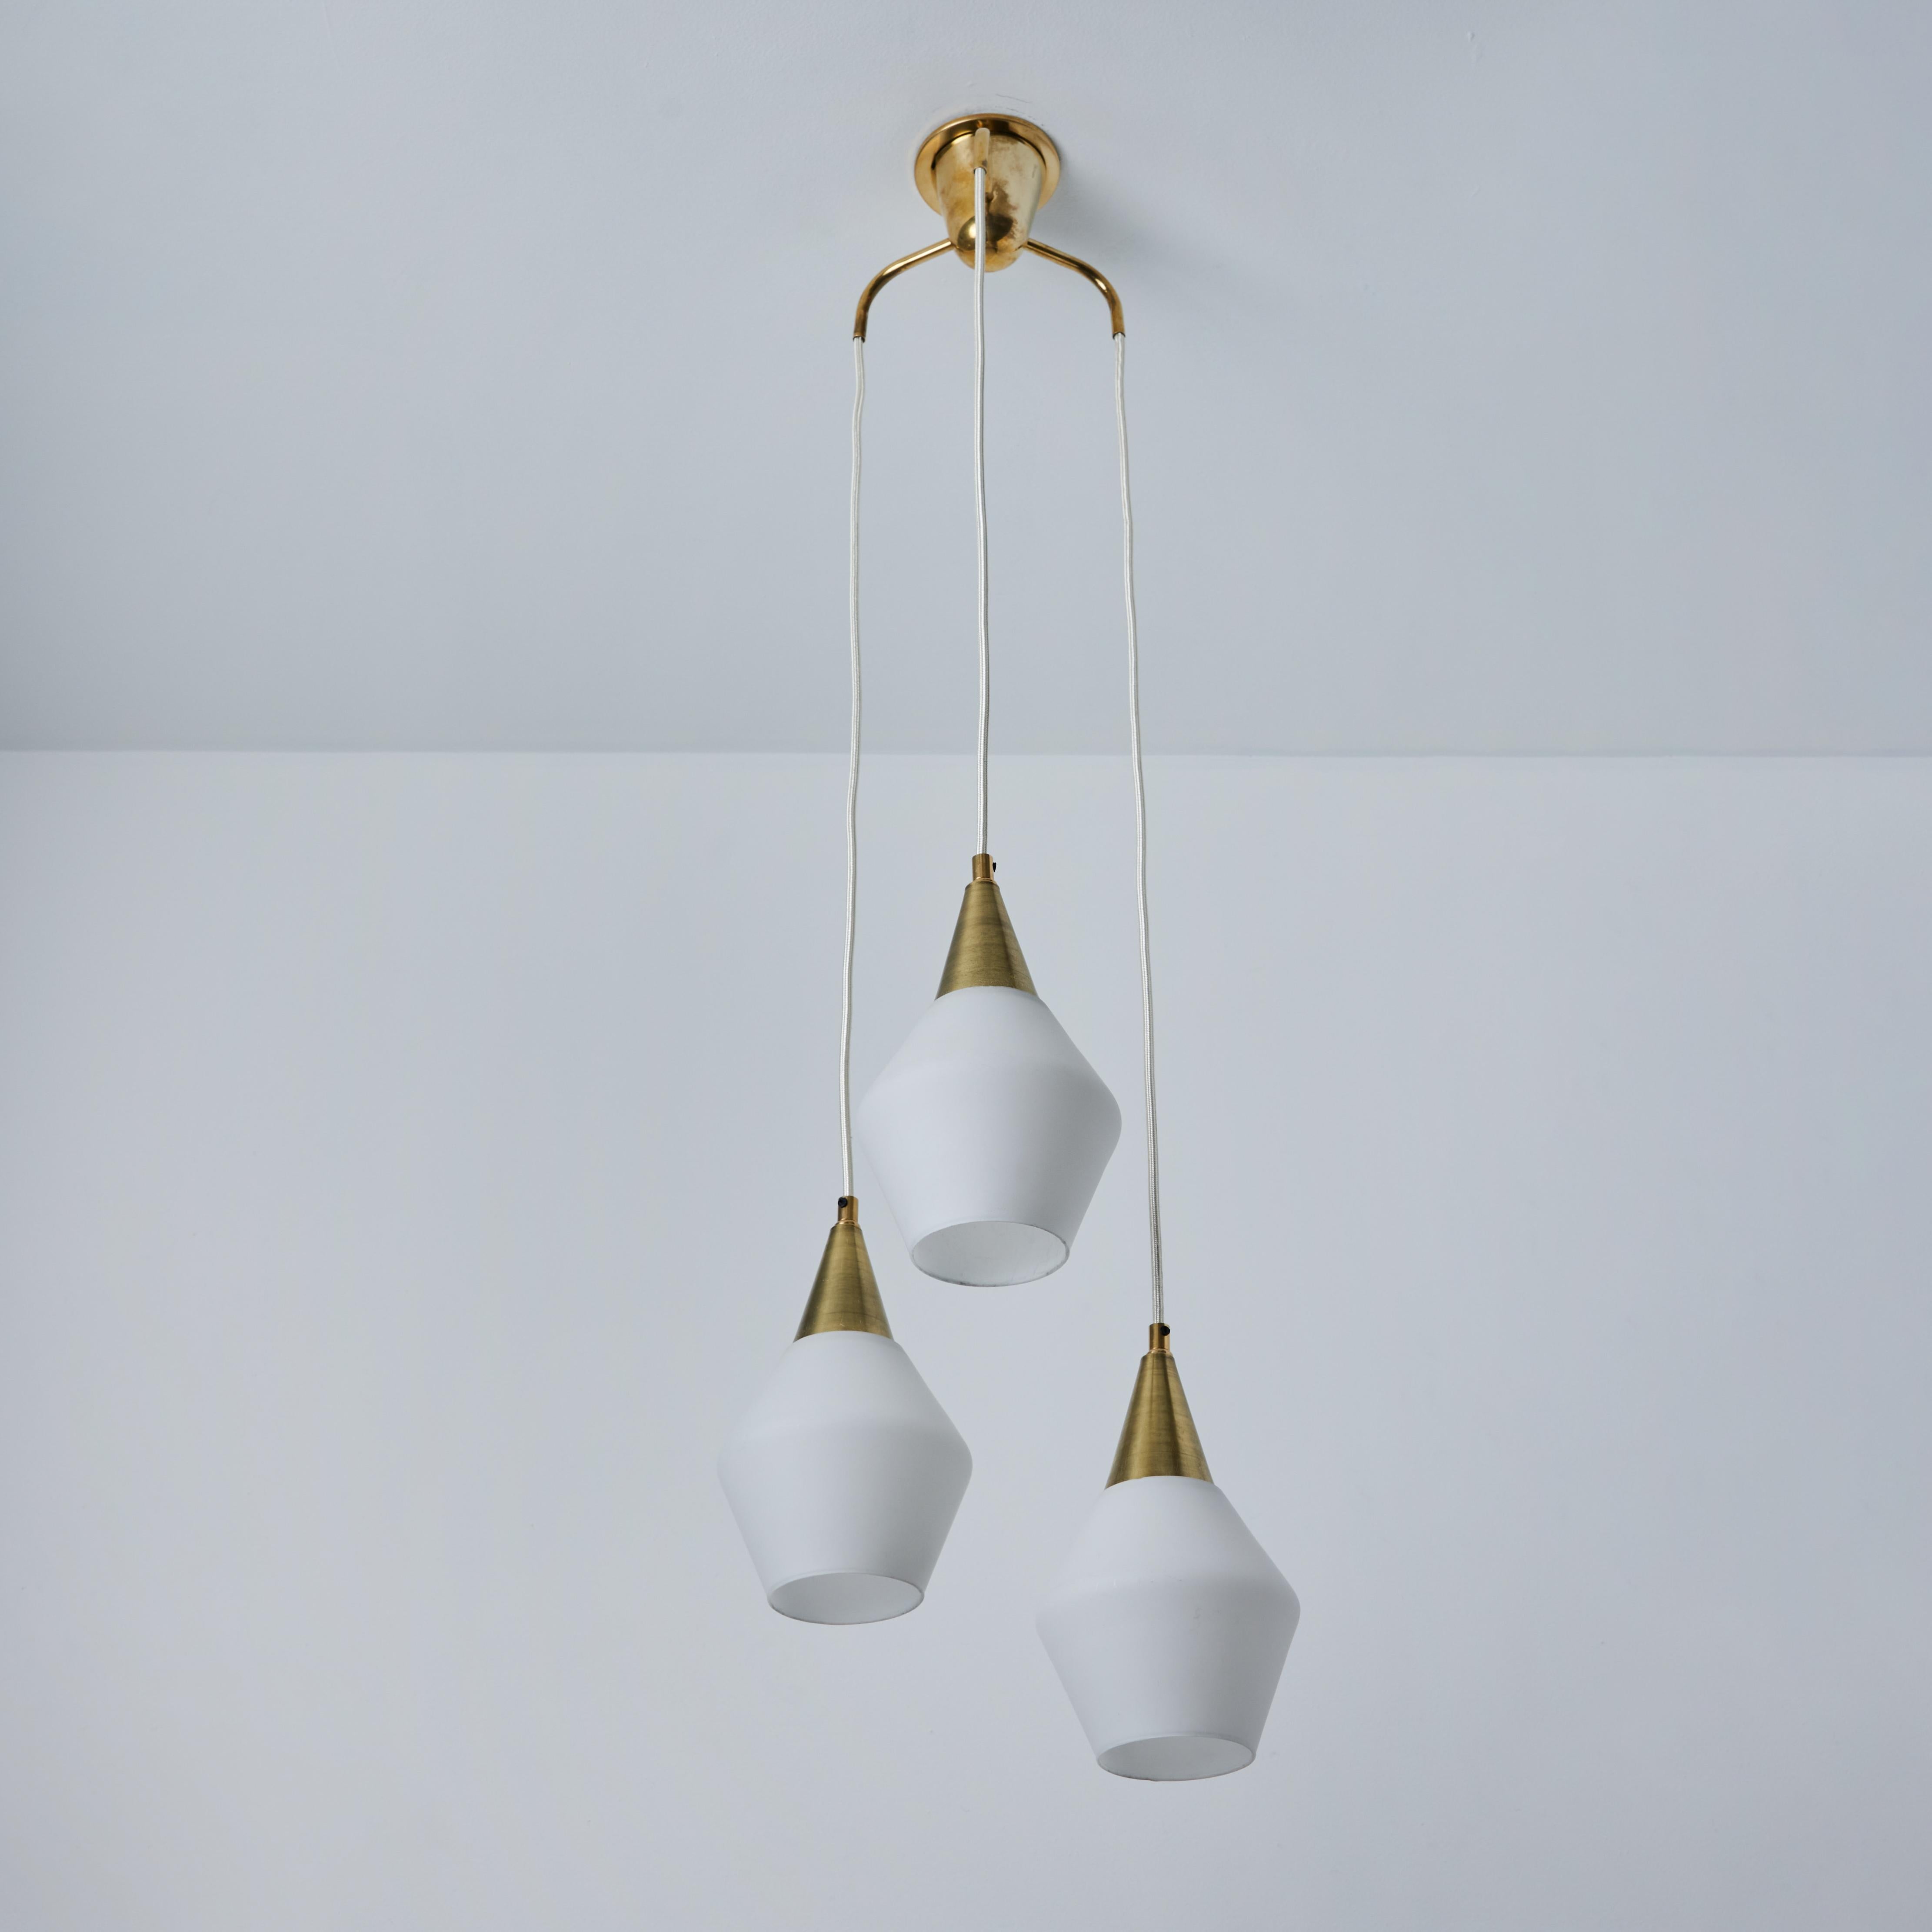 1960s Opaline Glass and Brass Chandelier Attributed to Mauri Almari for Idman For Sale 5